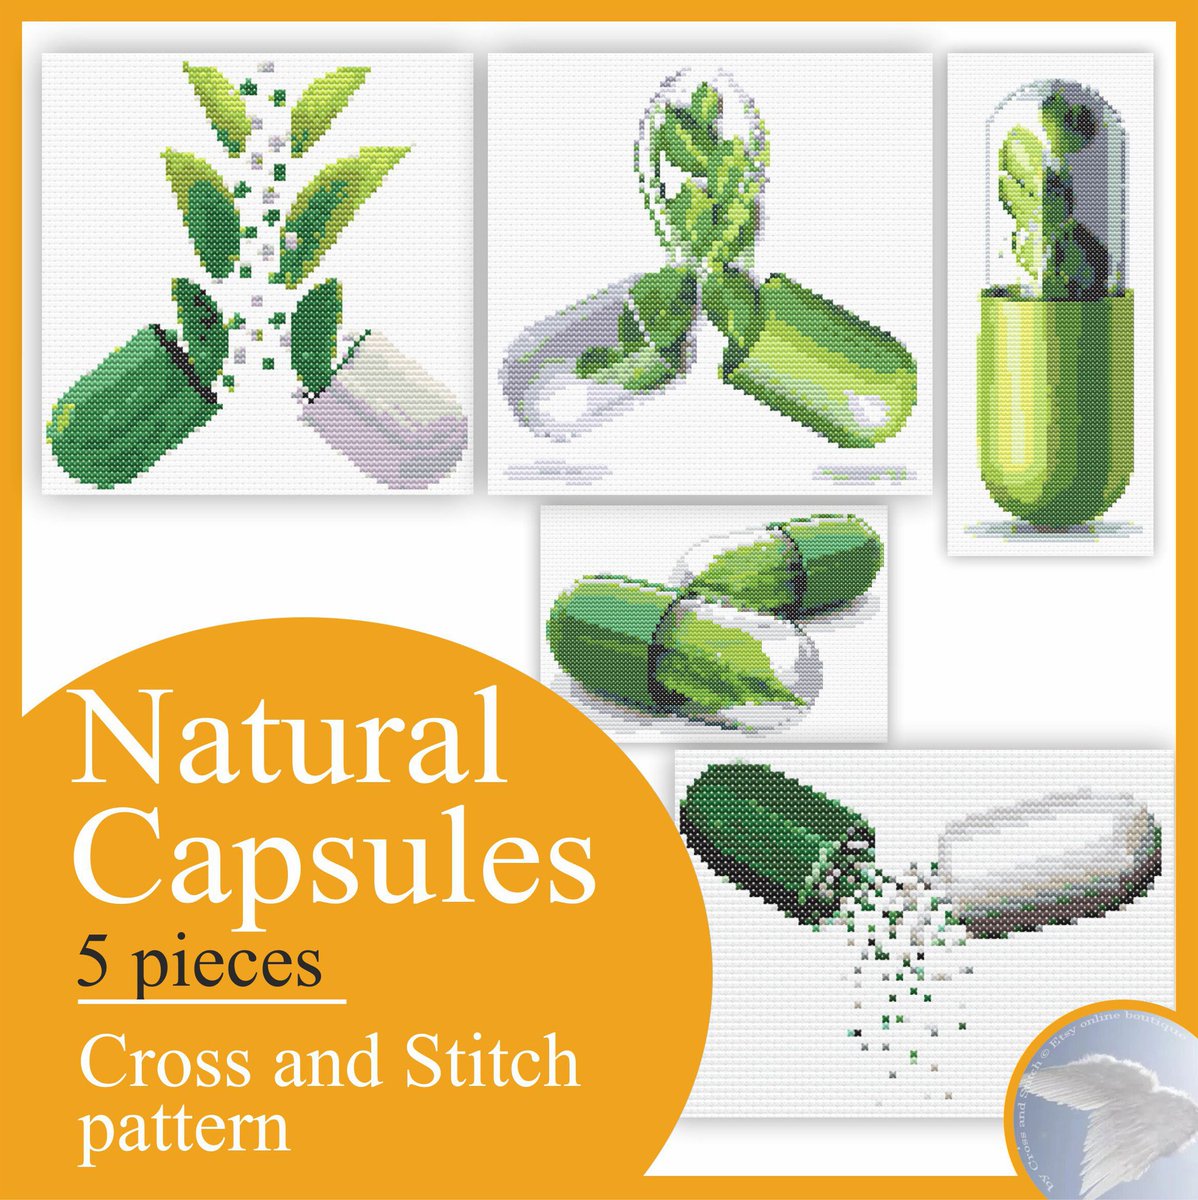 Excited to share the latest addition to my #etsy shop: Natural Pharmacy Capsules Green Leaves Pharmaceutical Symbol Simple Cross Stitch Pattern Instruction Embroidery etsy.me/3JpJJB9 #embroidery #prom #mothersday #crossstitch #alternativemedicine #naturalvitami